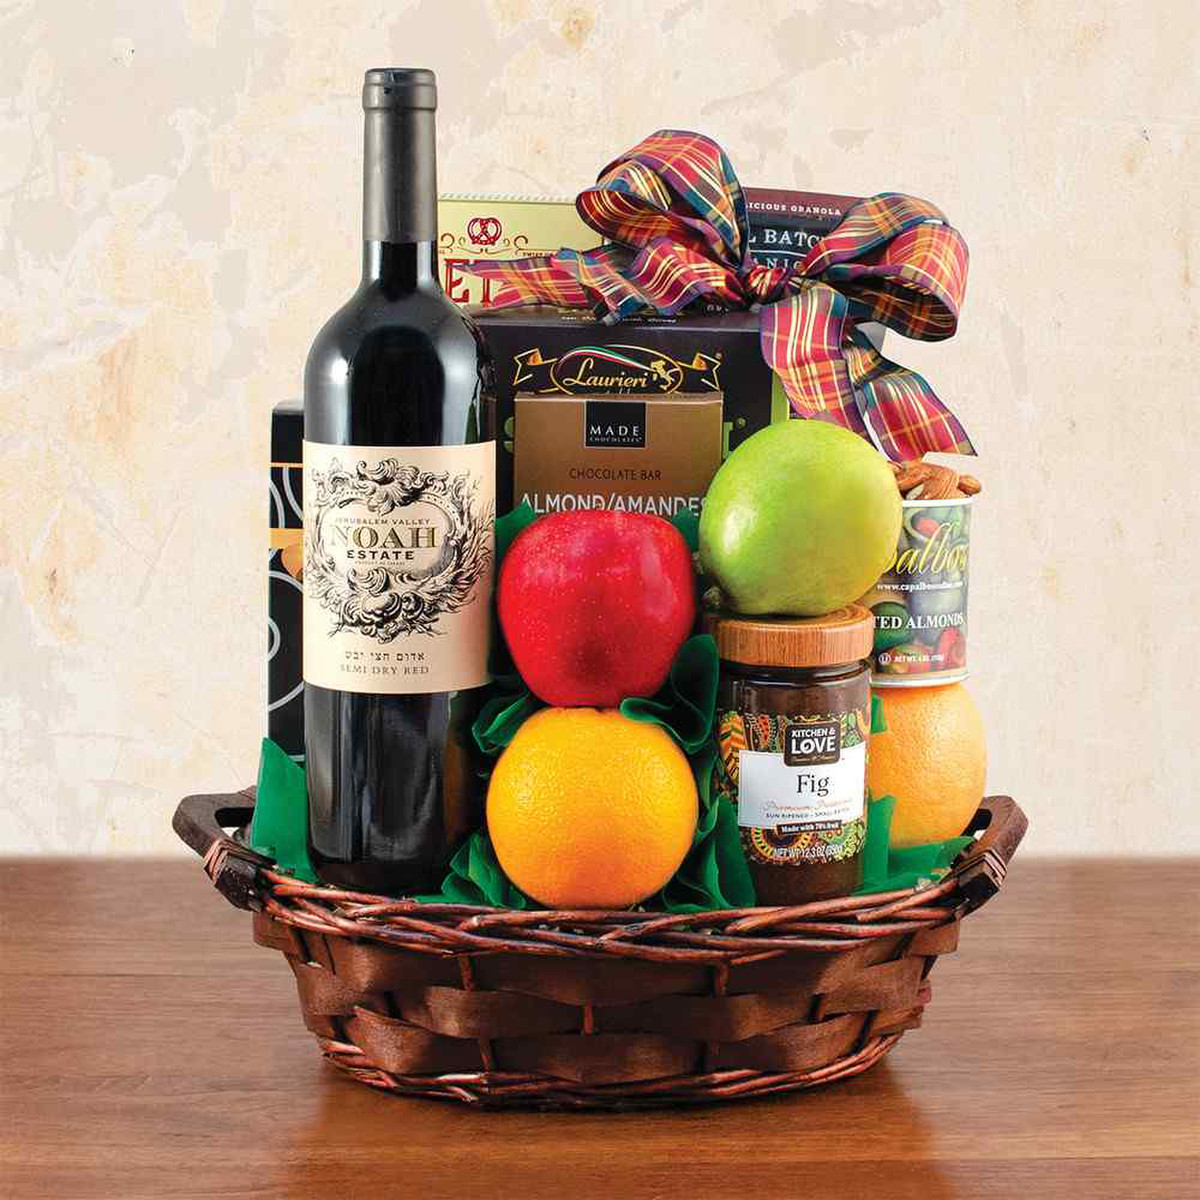 Sea of Galilee Fruit and Red Wine Kosher Gift Basket